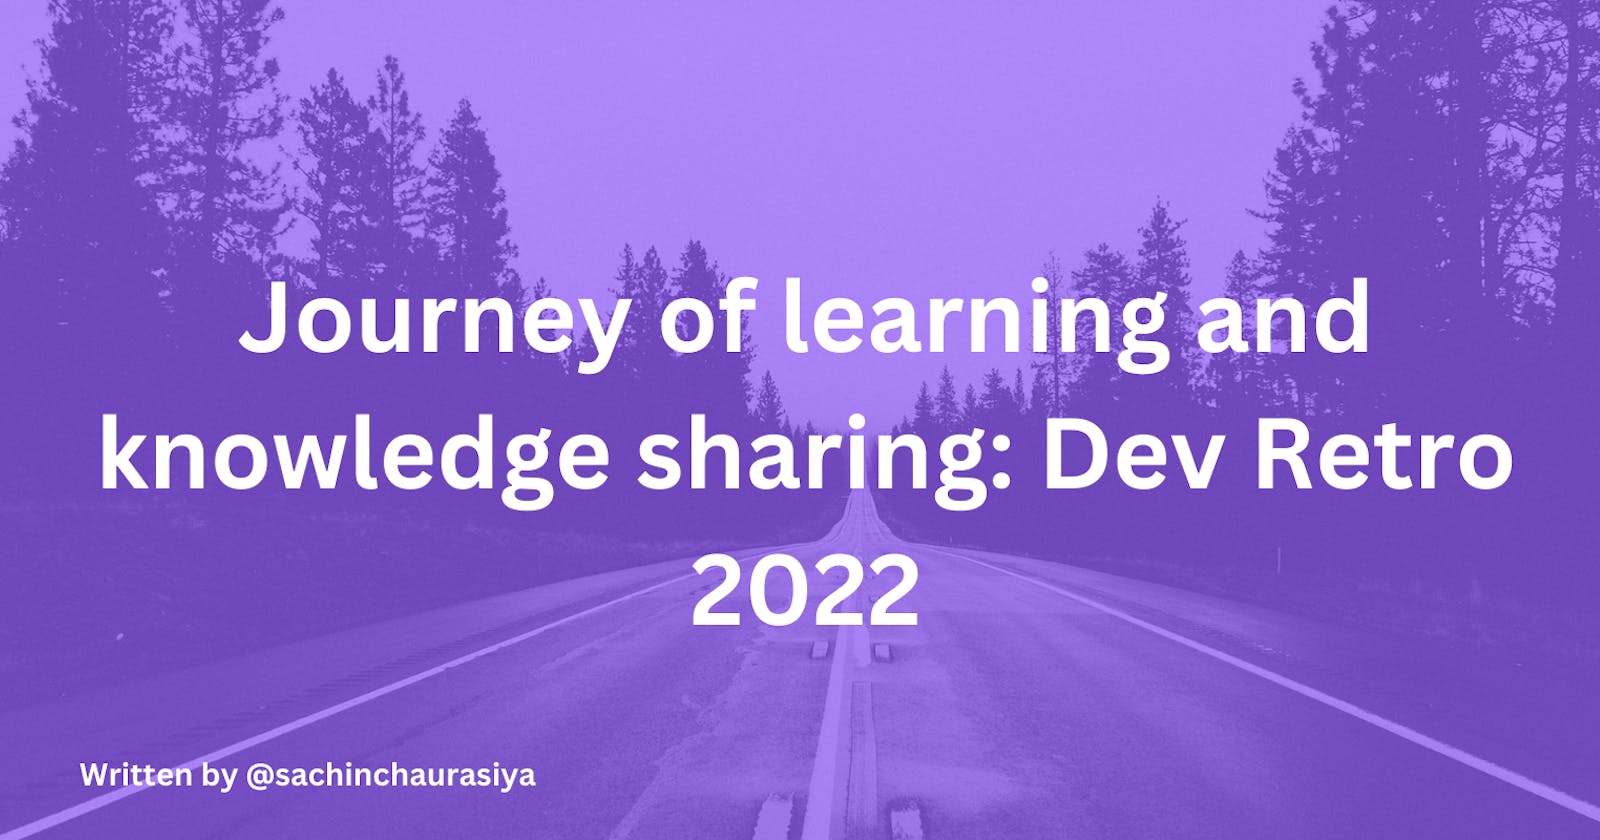 Journey of learning and knowledge sharing: Dev Retro 2022